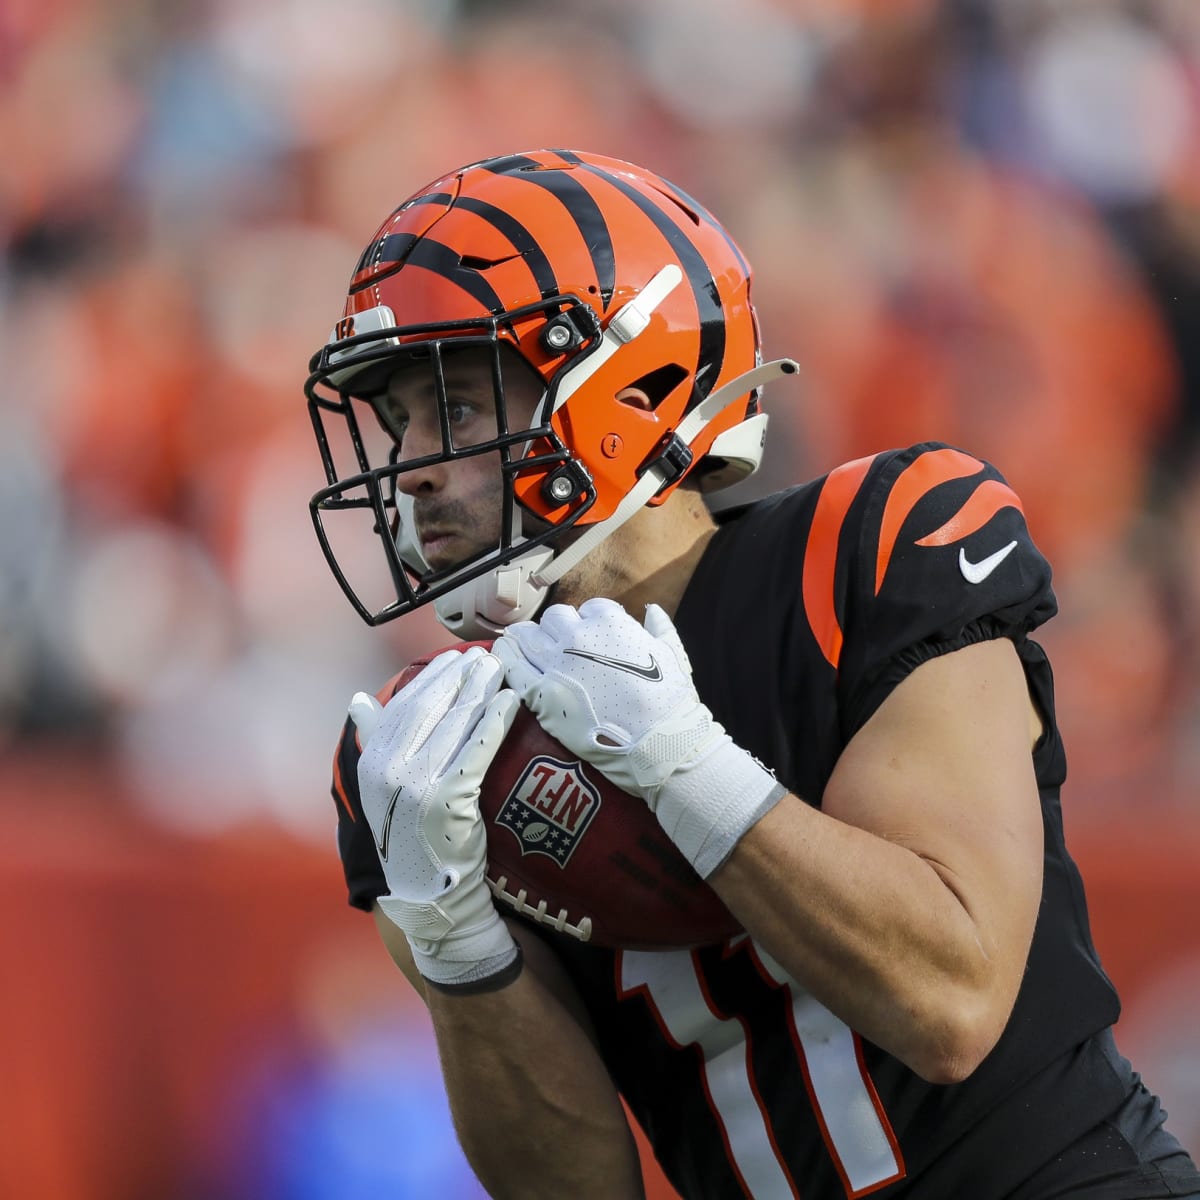 Super Bowl 56 preview: Cincinnati Bengals keys to victory over the